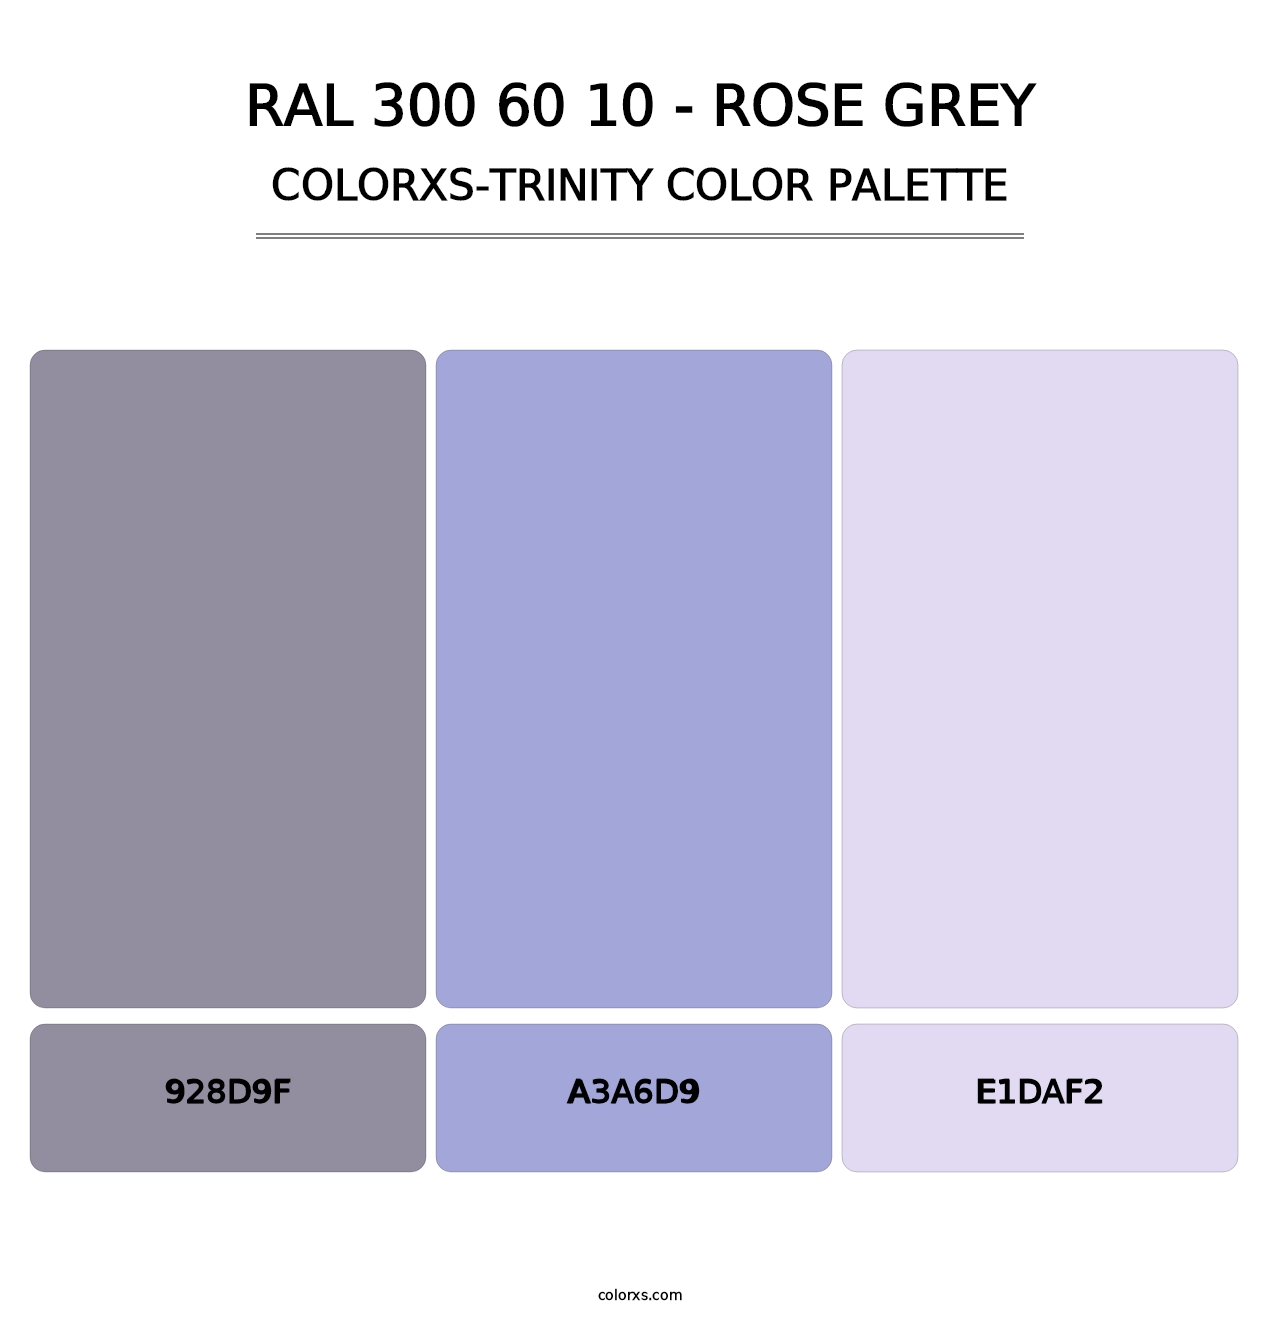 RAL 300 60 10 - Rose Grey - Colorxs Trinity Palette